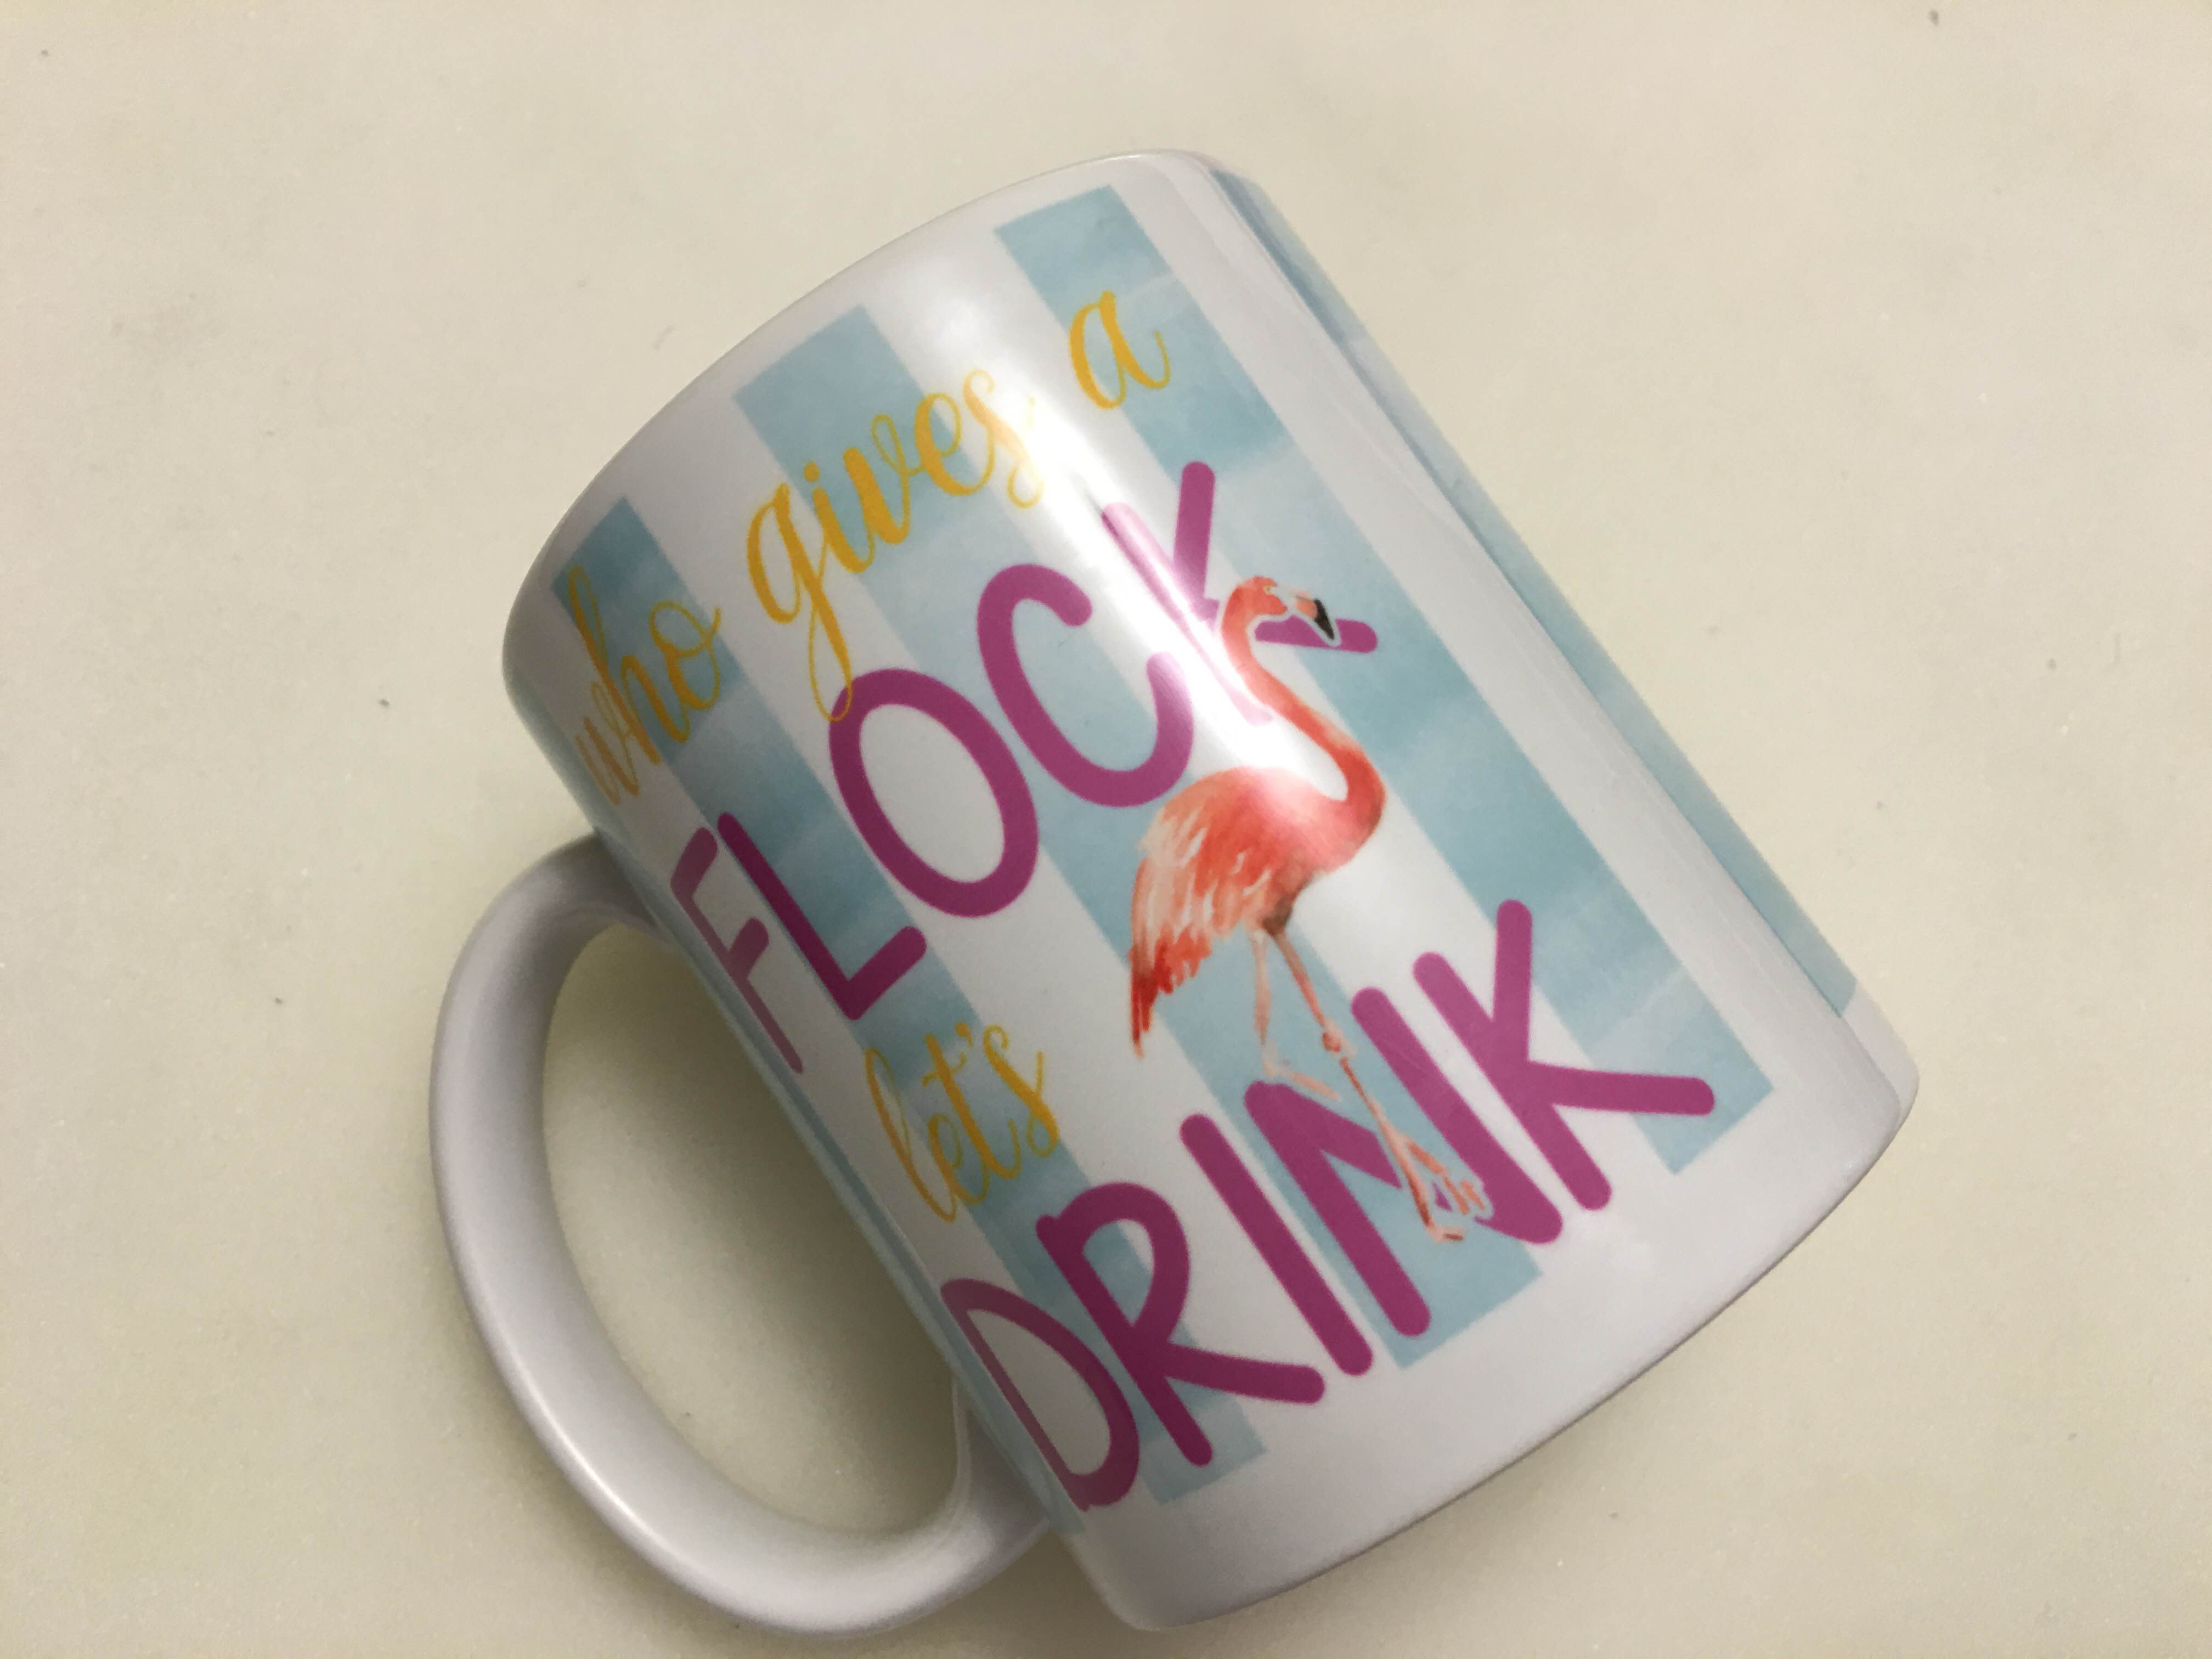 Who gives a FLOCK let's DRINK made with sublimation printing